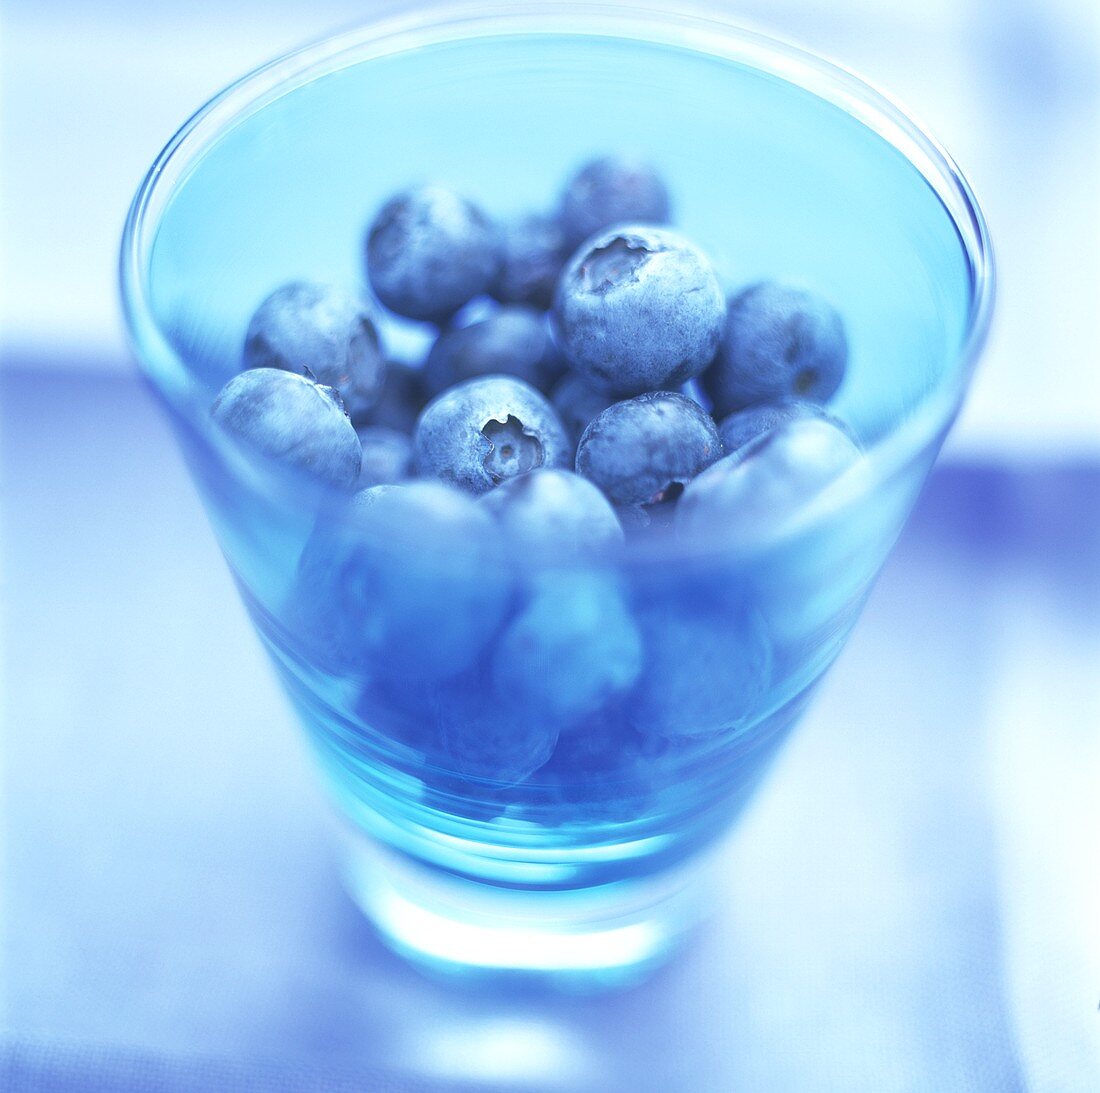 Blueberries in a blue glass